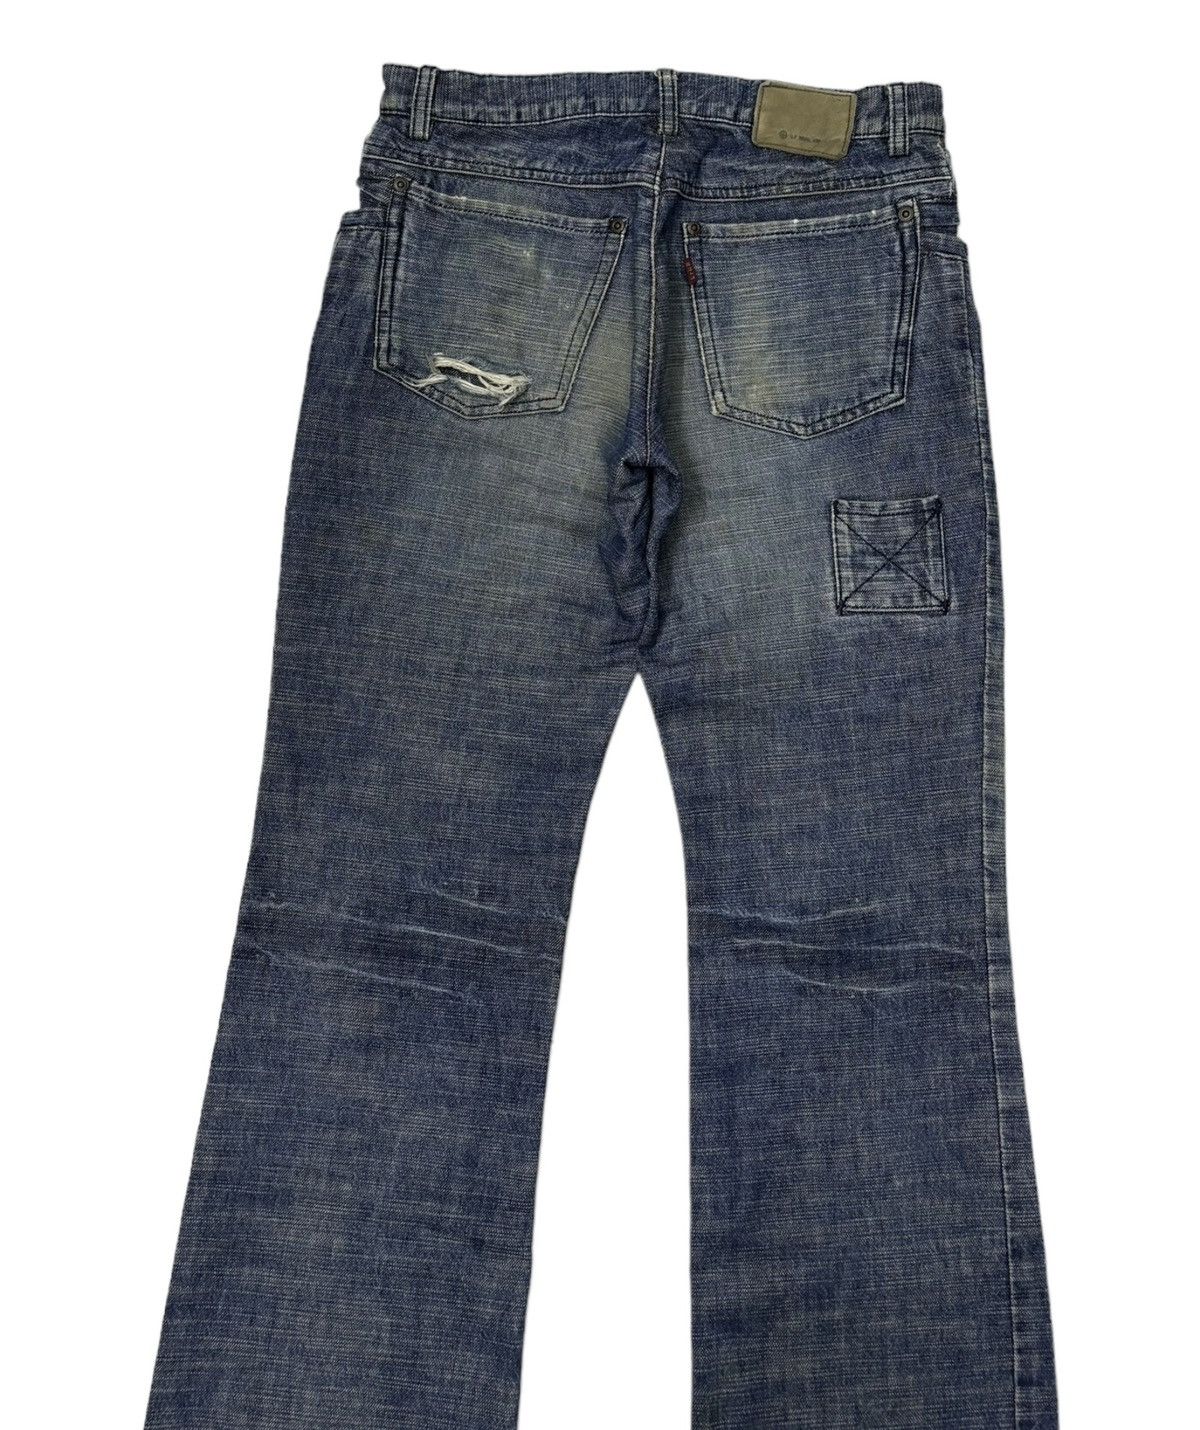 Archival Clothing - 🔥ARCHIVE L7 REAL HIP JAPANESE FLARED DENIM BOOTCUT JEANS - 3